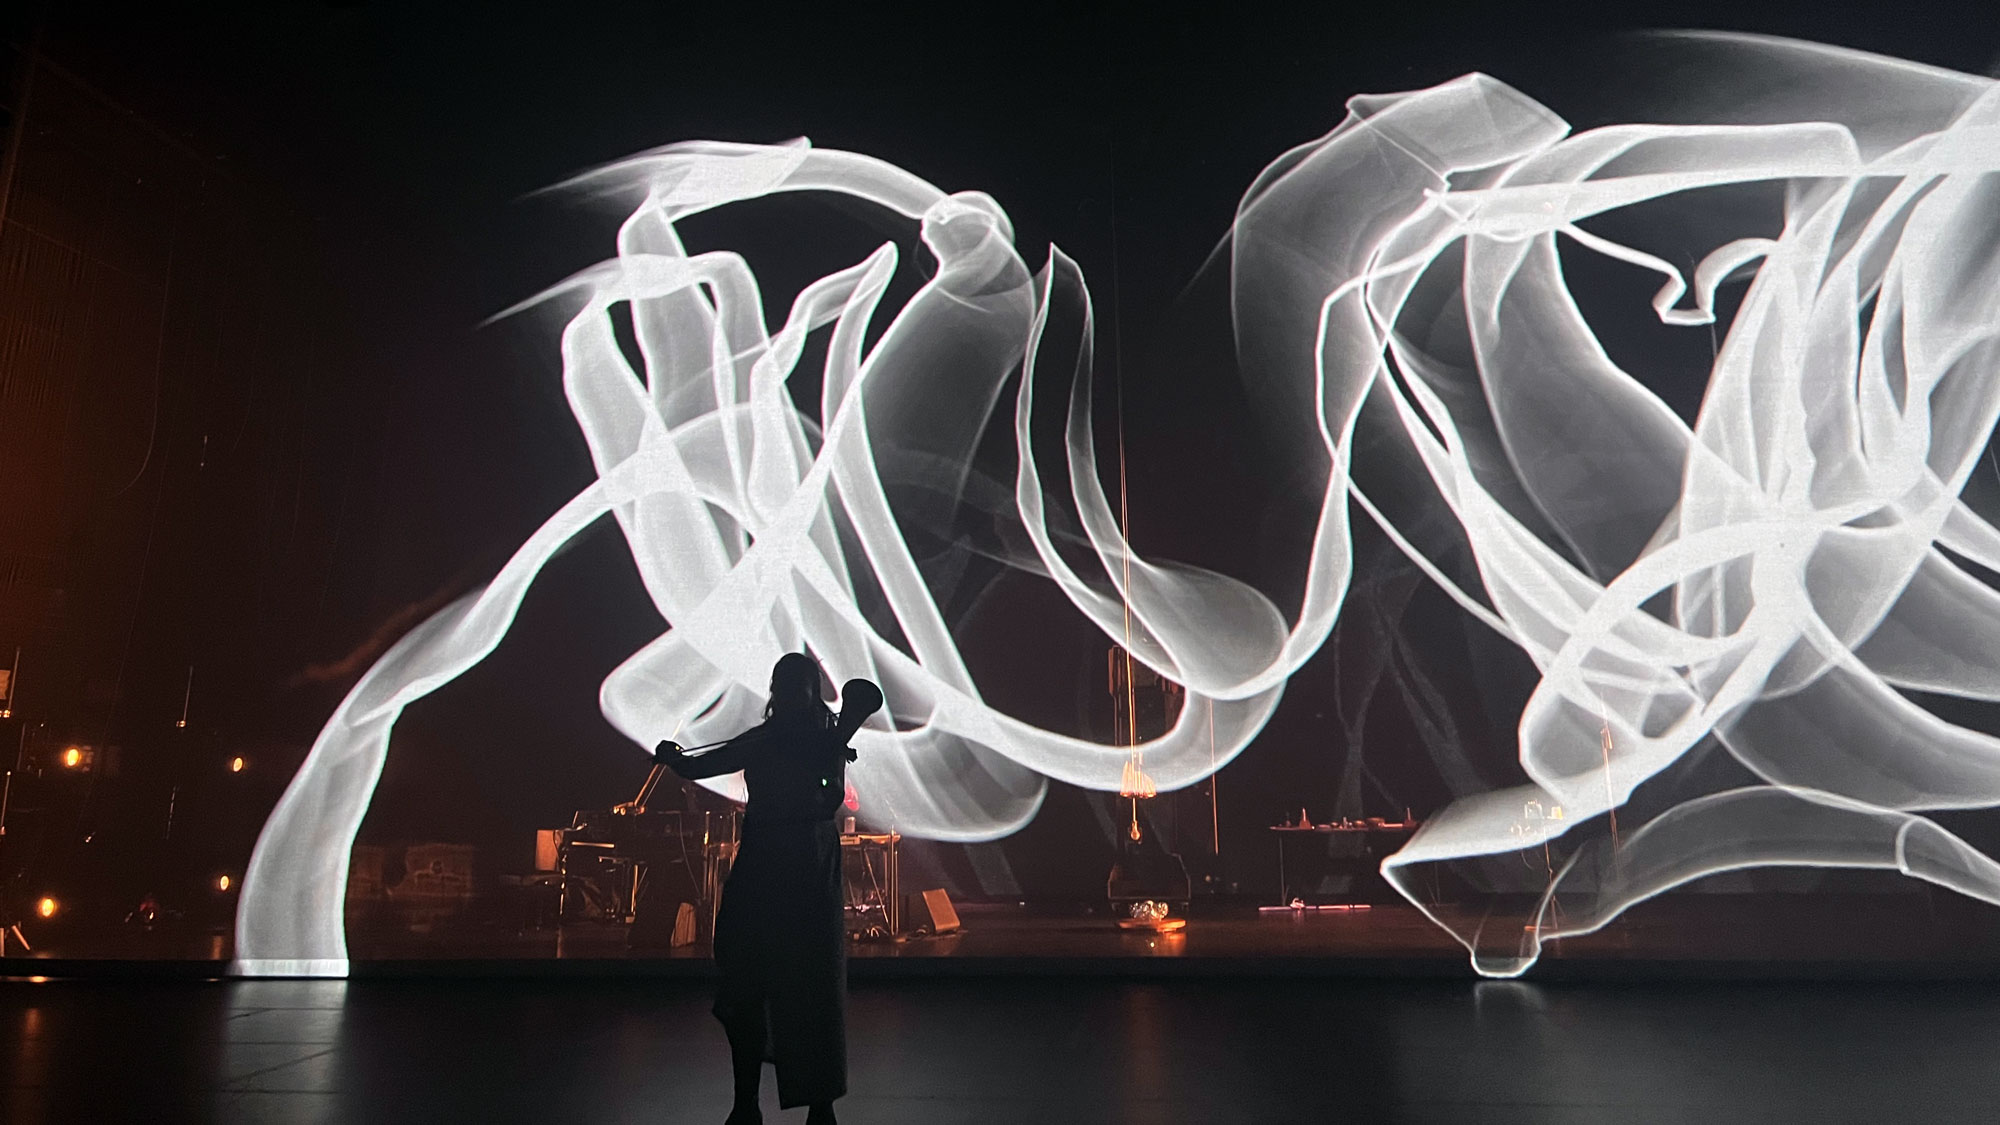 bora yoon playing their violin in the foreground with a abstract projection of ribbon-like white light in the background.